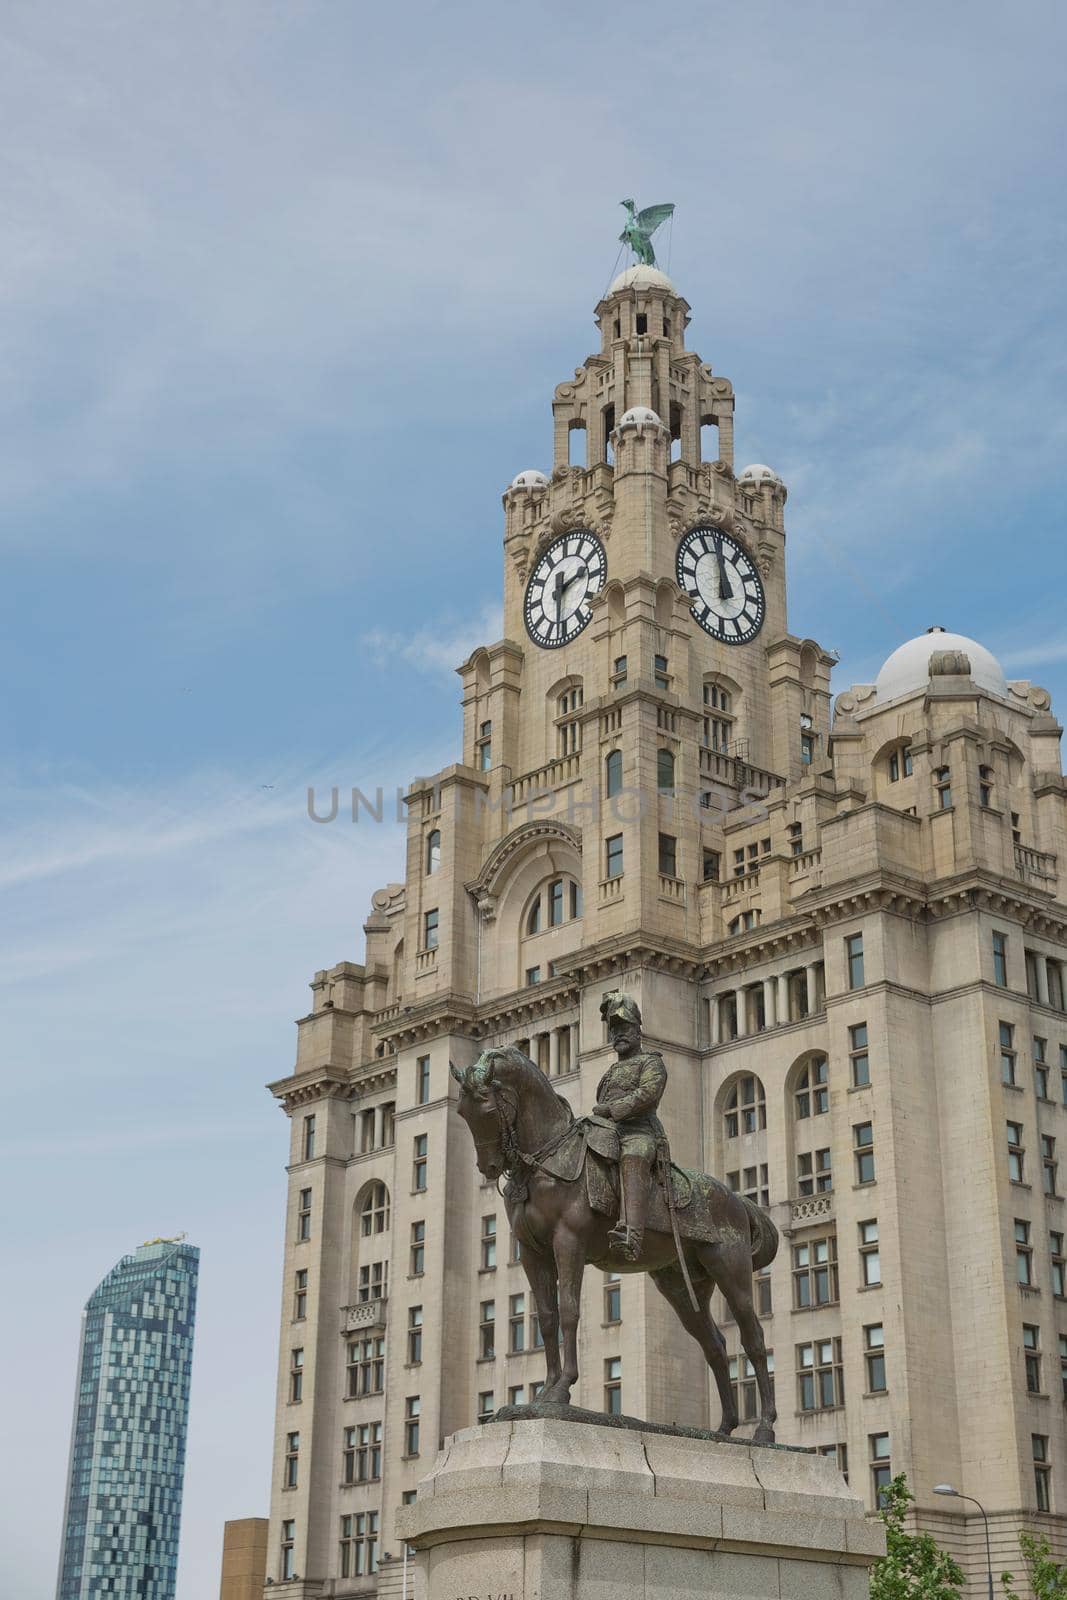 LIVERPOOL, ENGLAND, UK - JUNE 07, 2017: Liverpool's Historic Liver Building and Clocktower, Liverpool, England, United Kingdom. Liverpool, in North West England, is a major city and metropolitan borough with population of 478,580 in 2015.